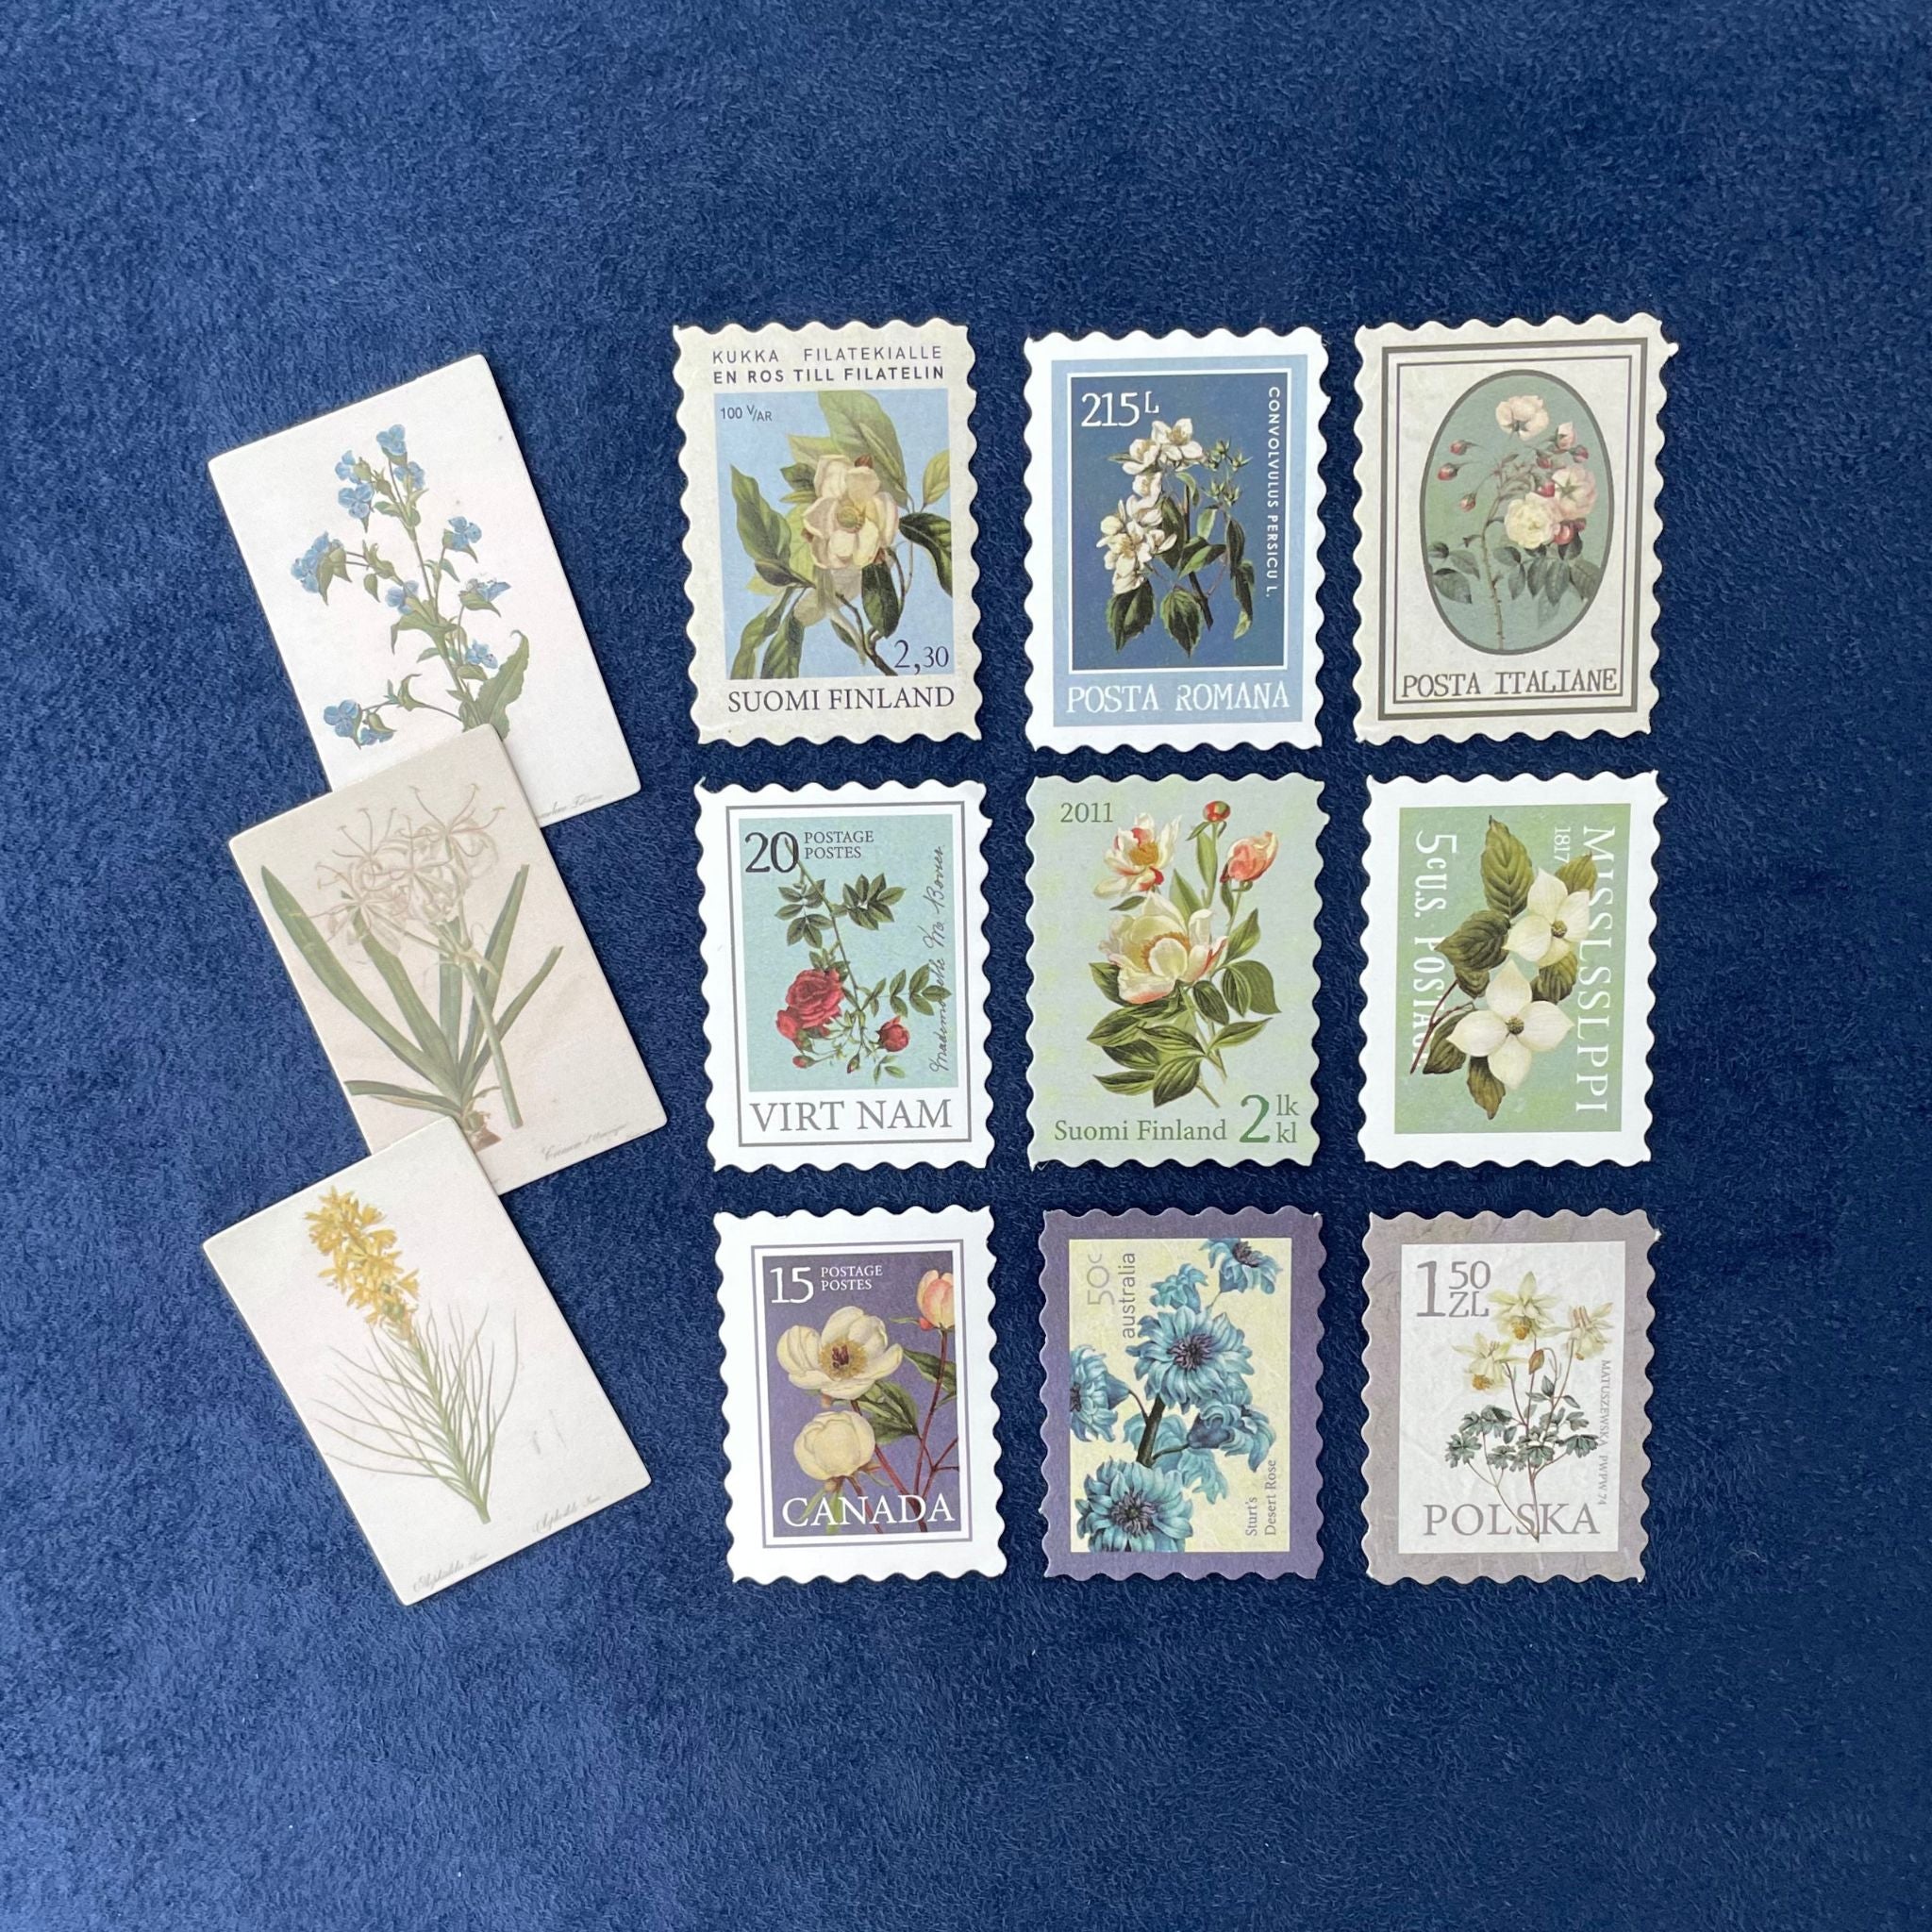 Postage Stamps for flat lays in Blue & Green